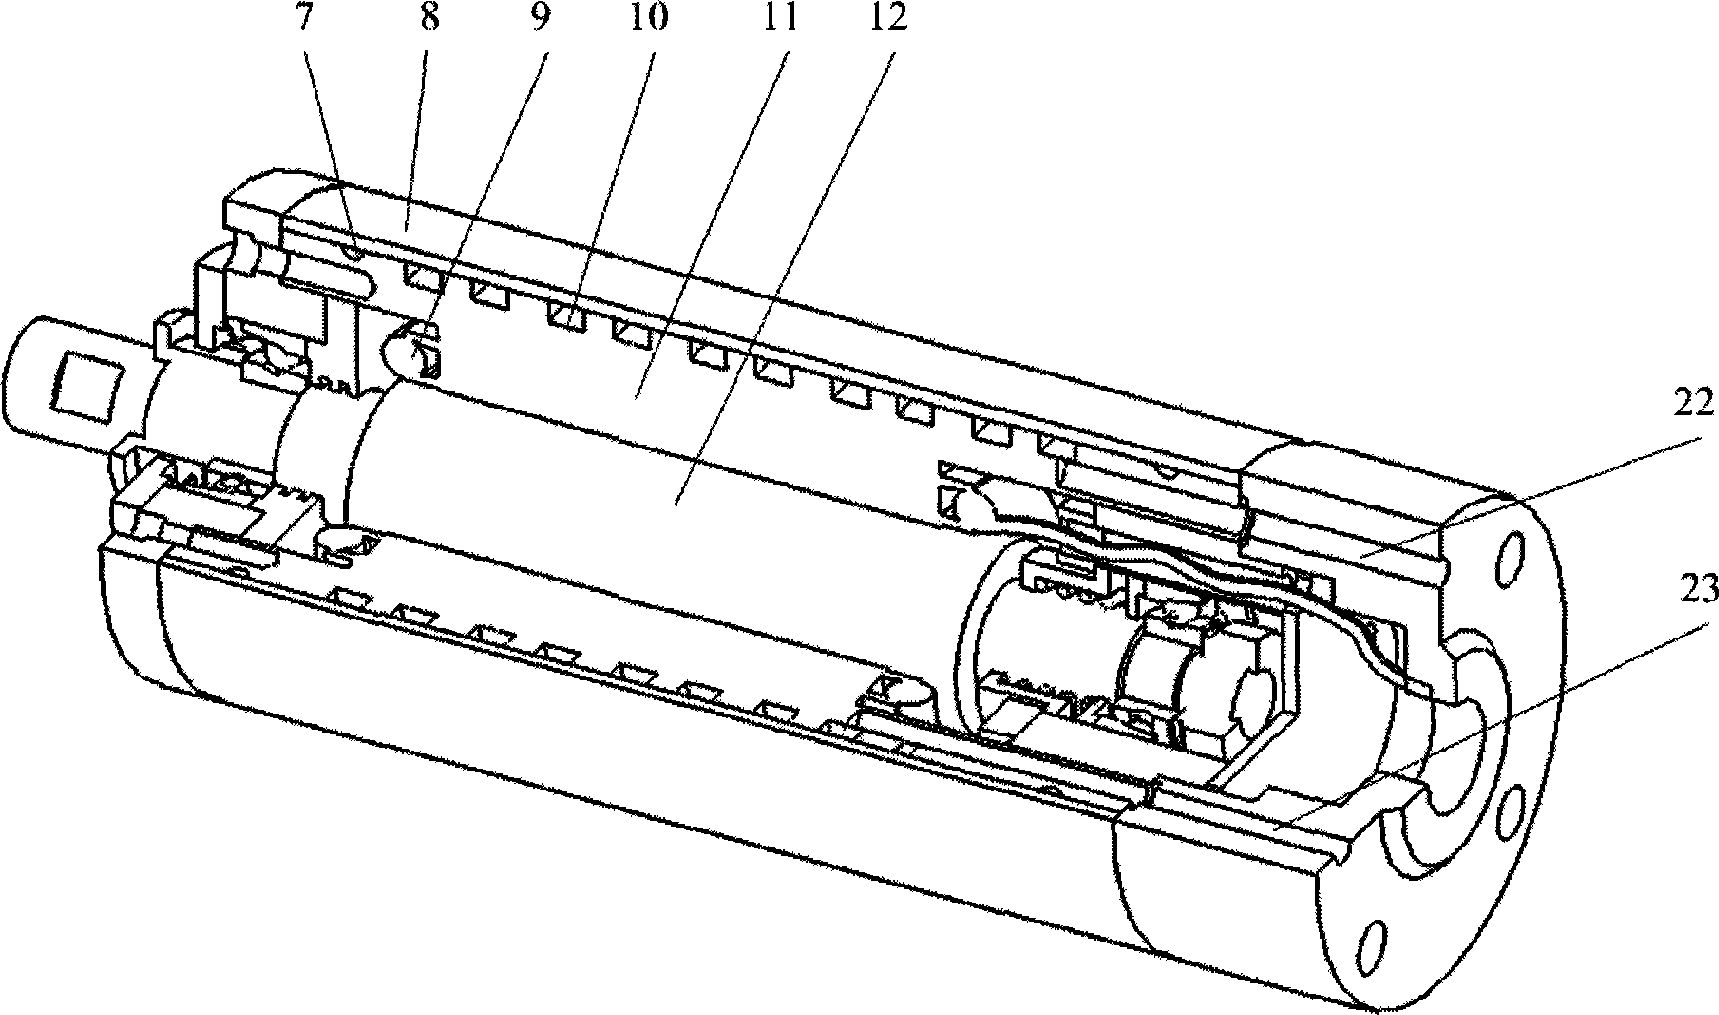 Electric principal shaft with composite stator structure